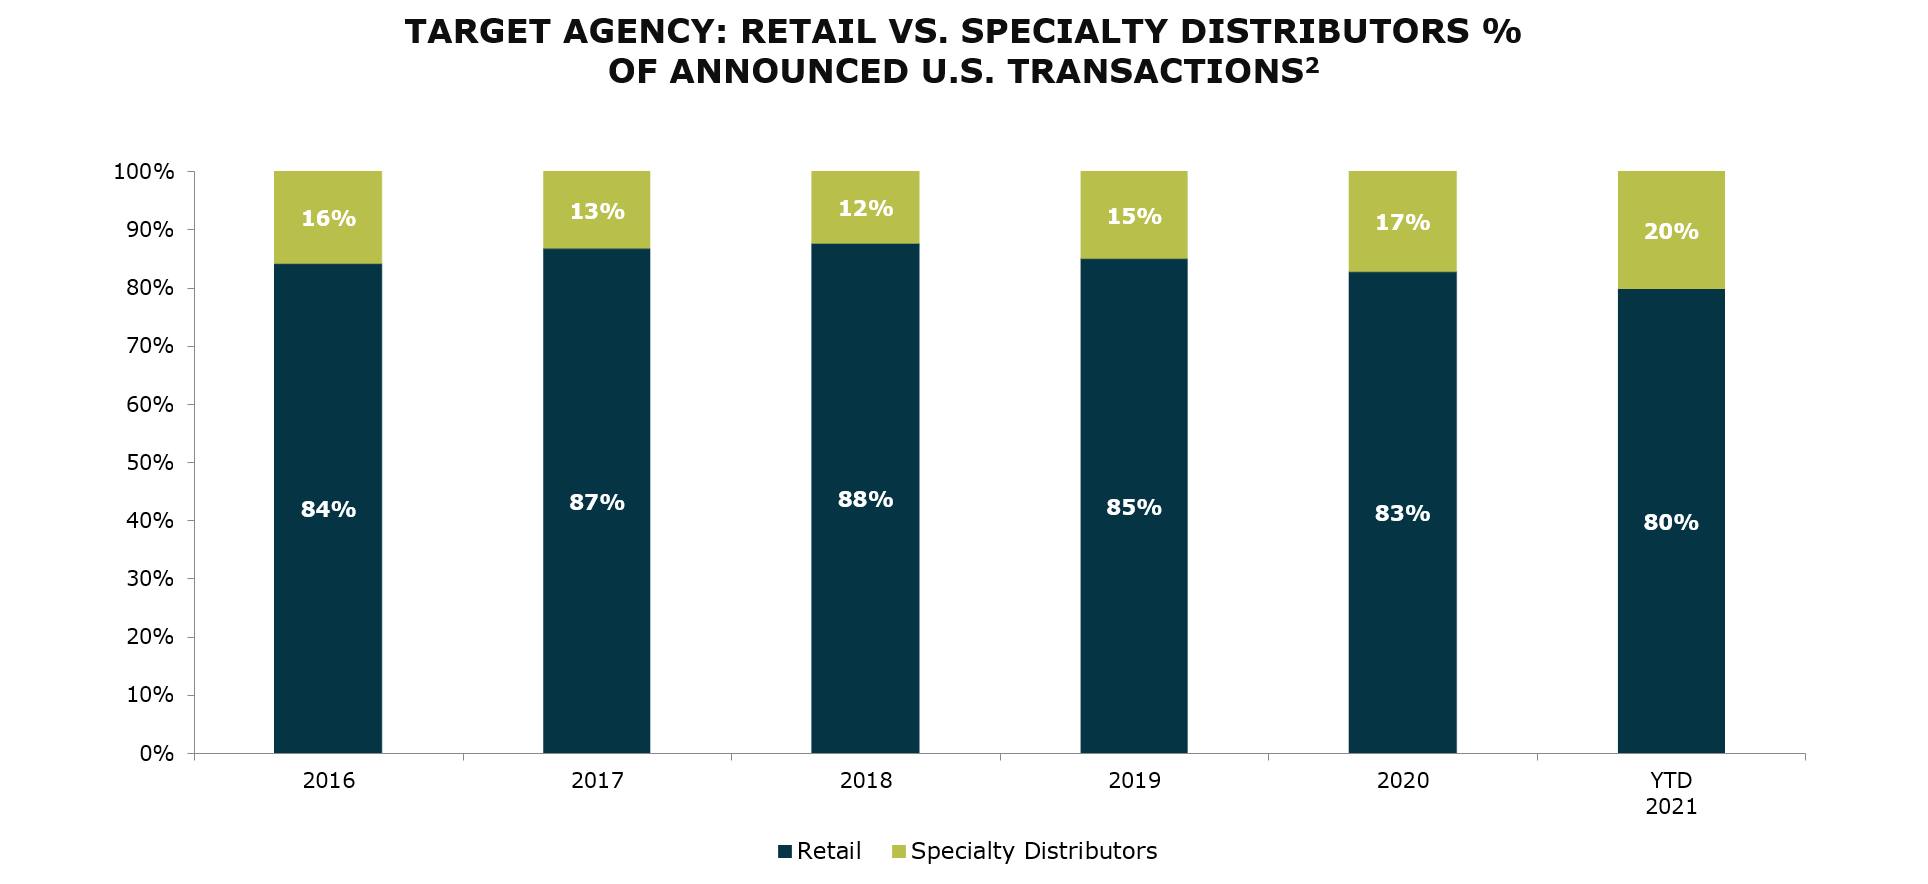 Target Agency - Retail Vs Specialty Distributors Percentage of Announced U.S. Transactions-2